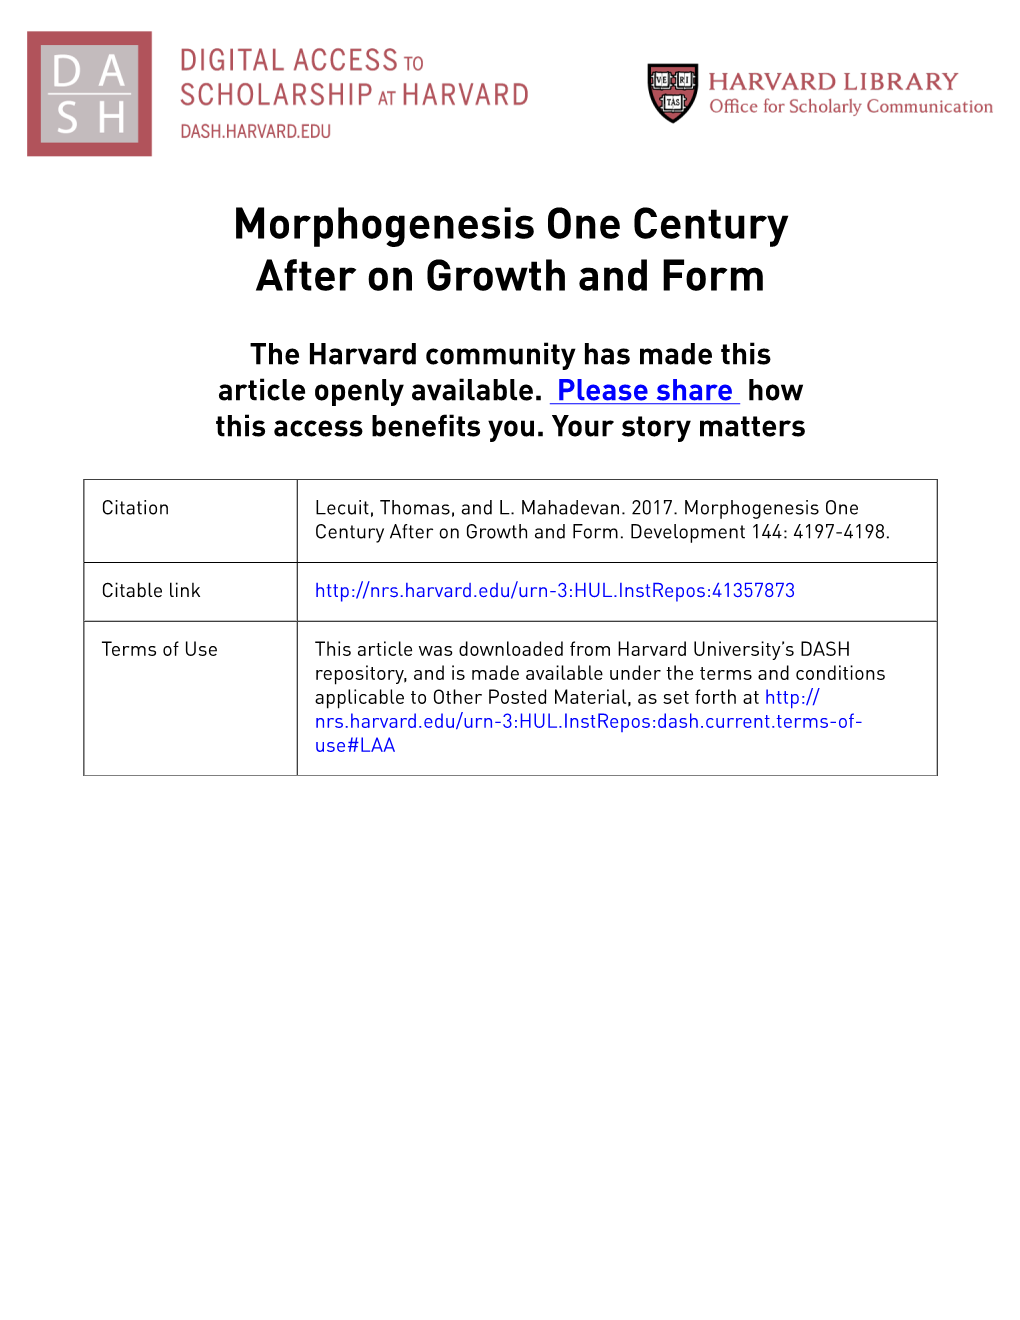 Morphogenesis One Century After on Growth and Form